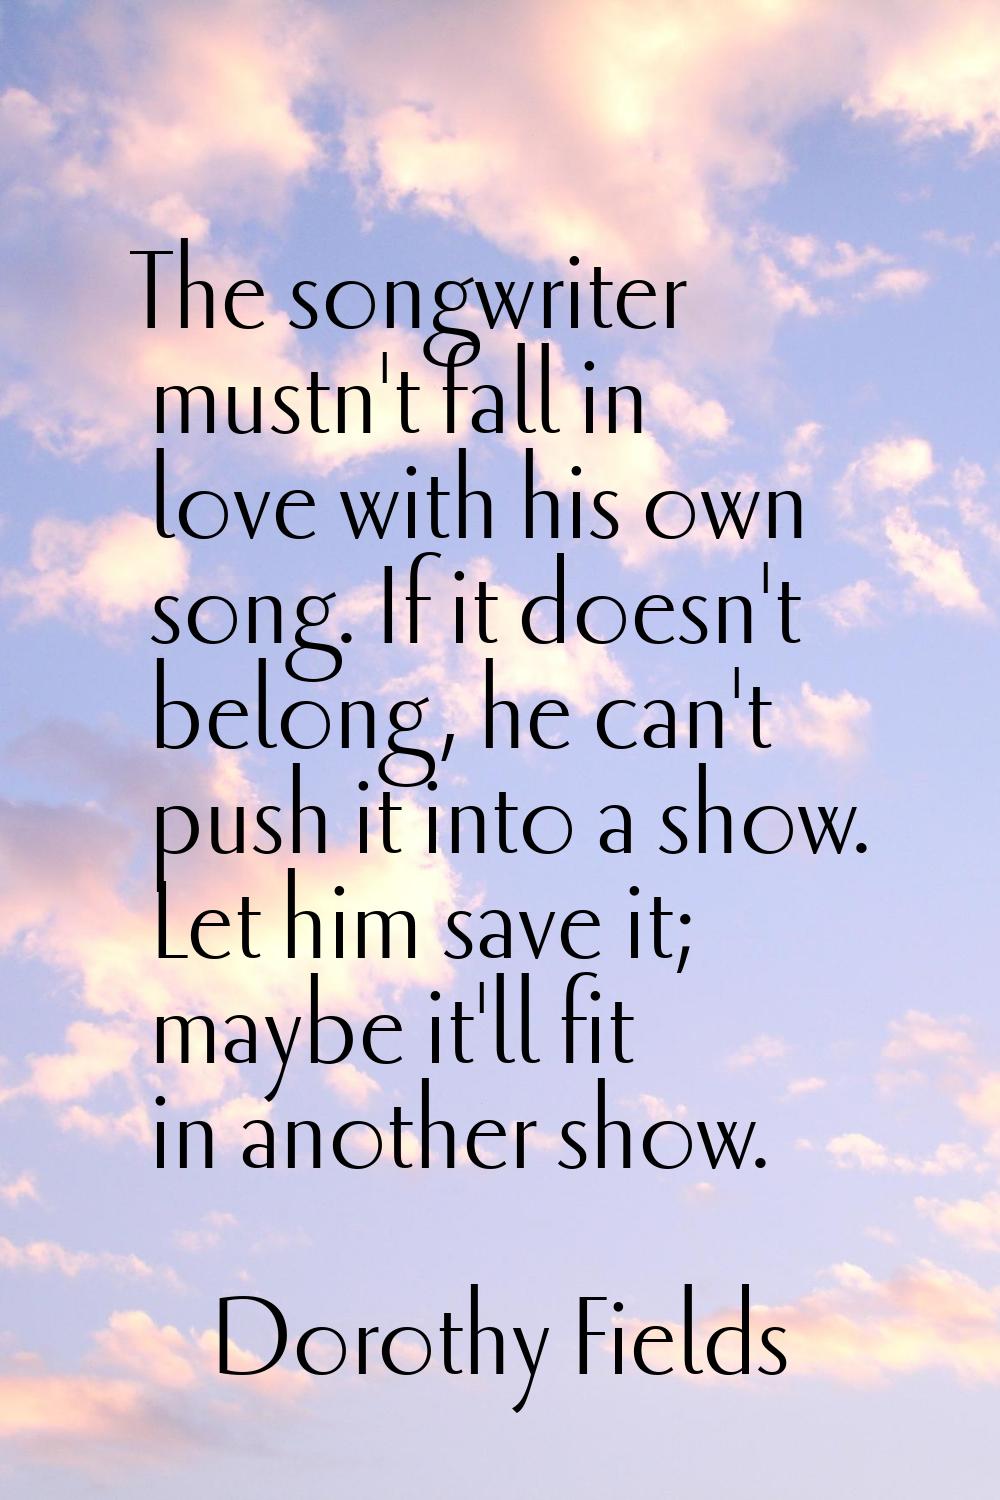 The songwriter mustn't fall in love with his own song. If it doesn't belong, he can't push it into 